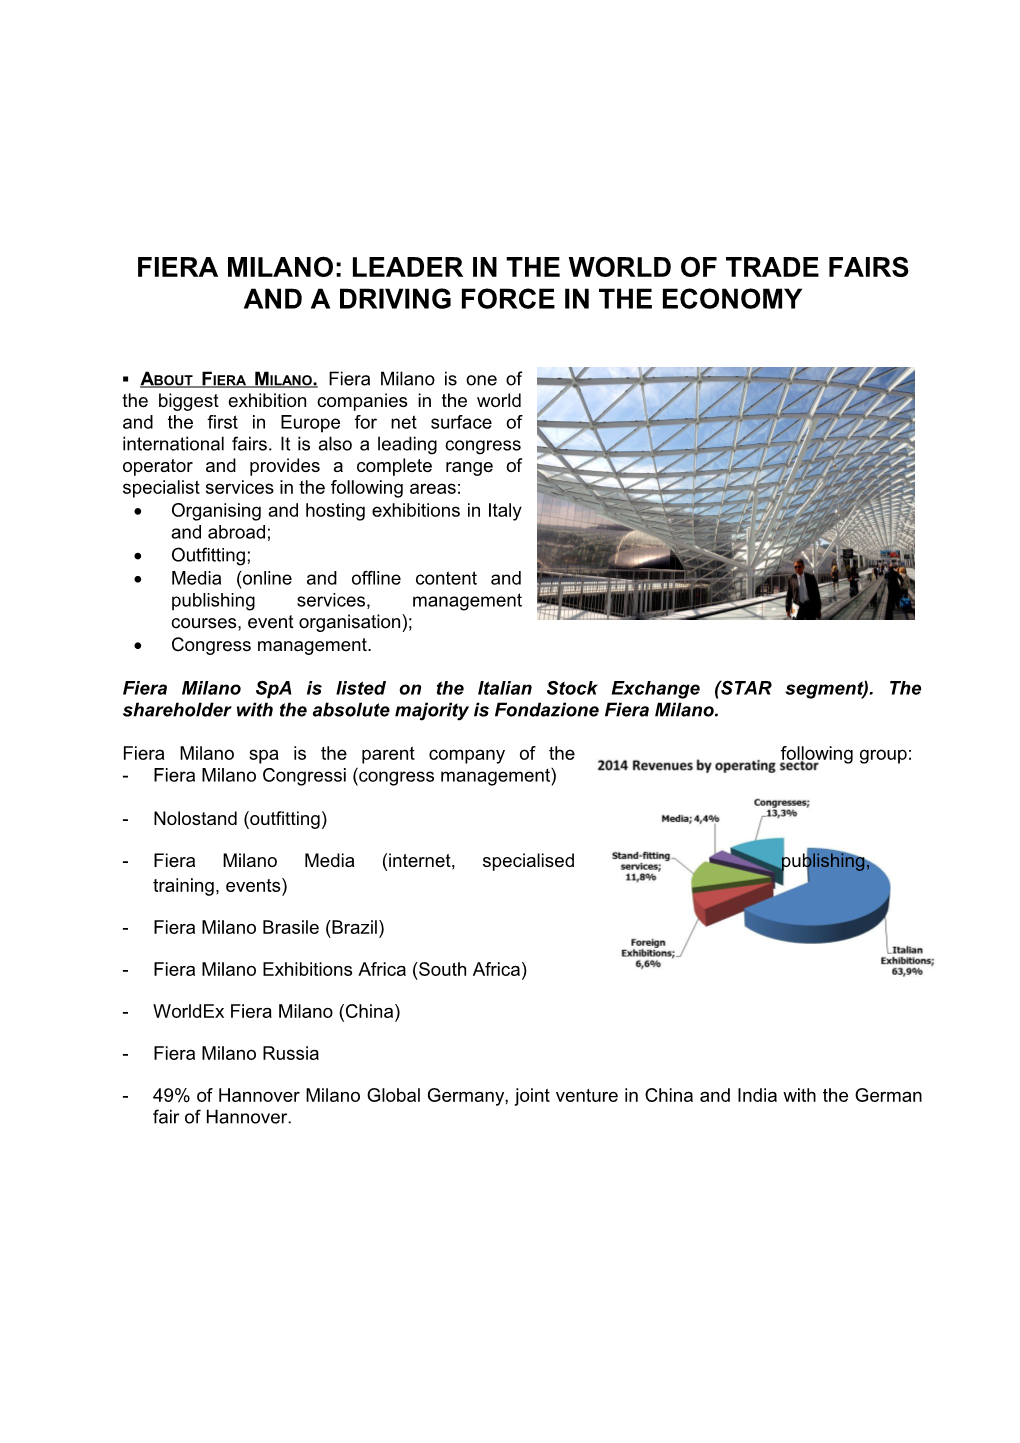 Fiera Milano: Leader in the World of Trade Fairs